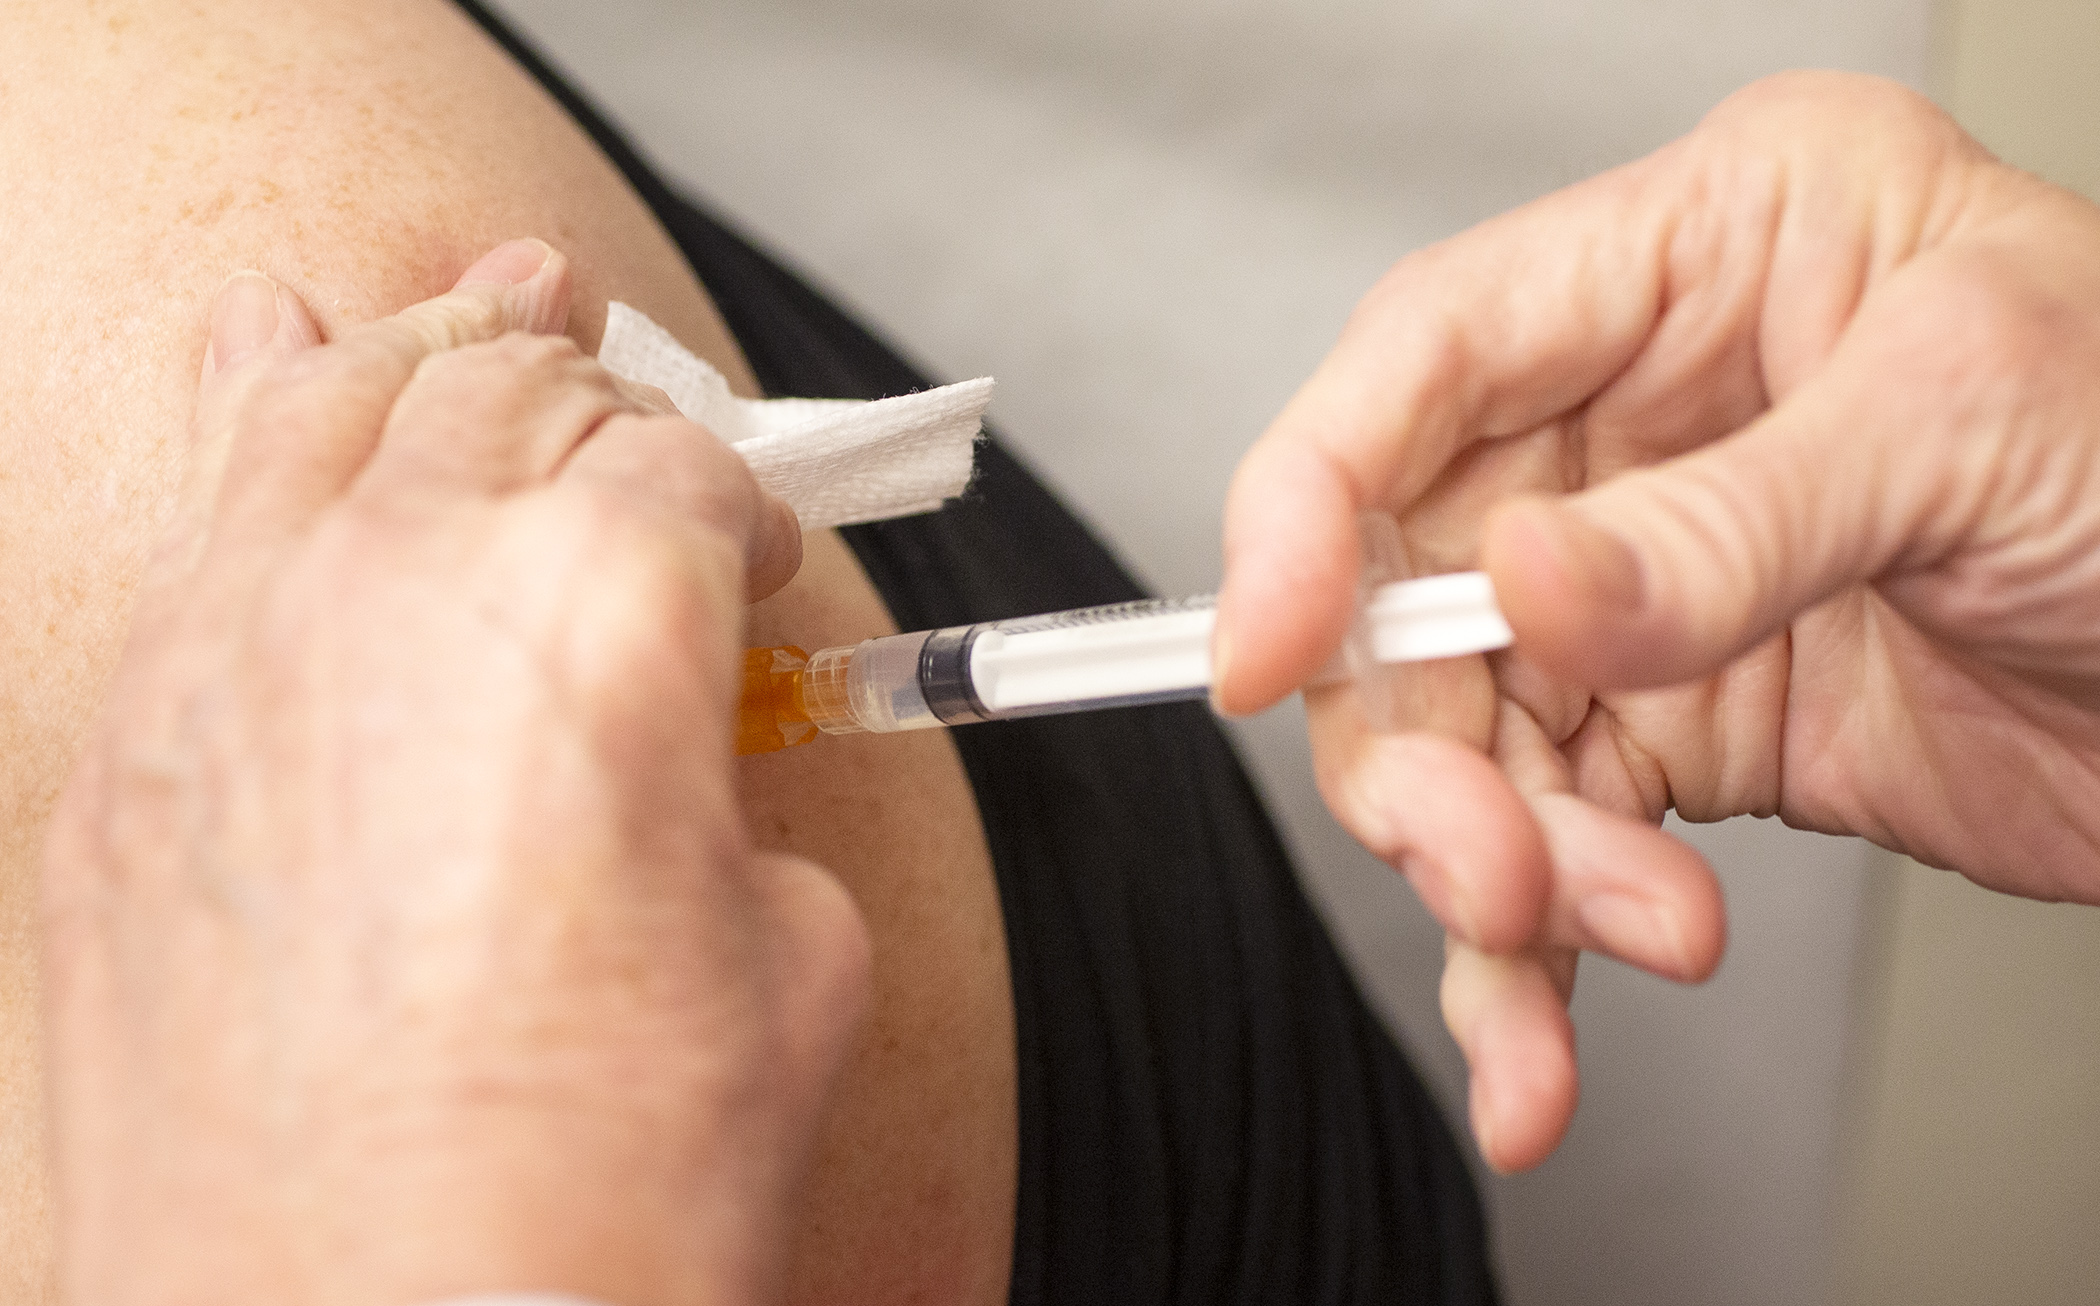 Minnesota is still on track to complete vaccinations in skilled nursing facilities — both residents and staff — by early February, the state's top health official told House lawmakers. Photo by Paul Battaglia